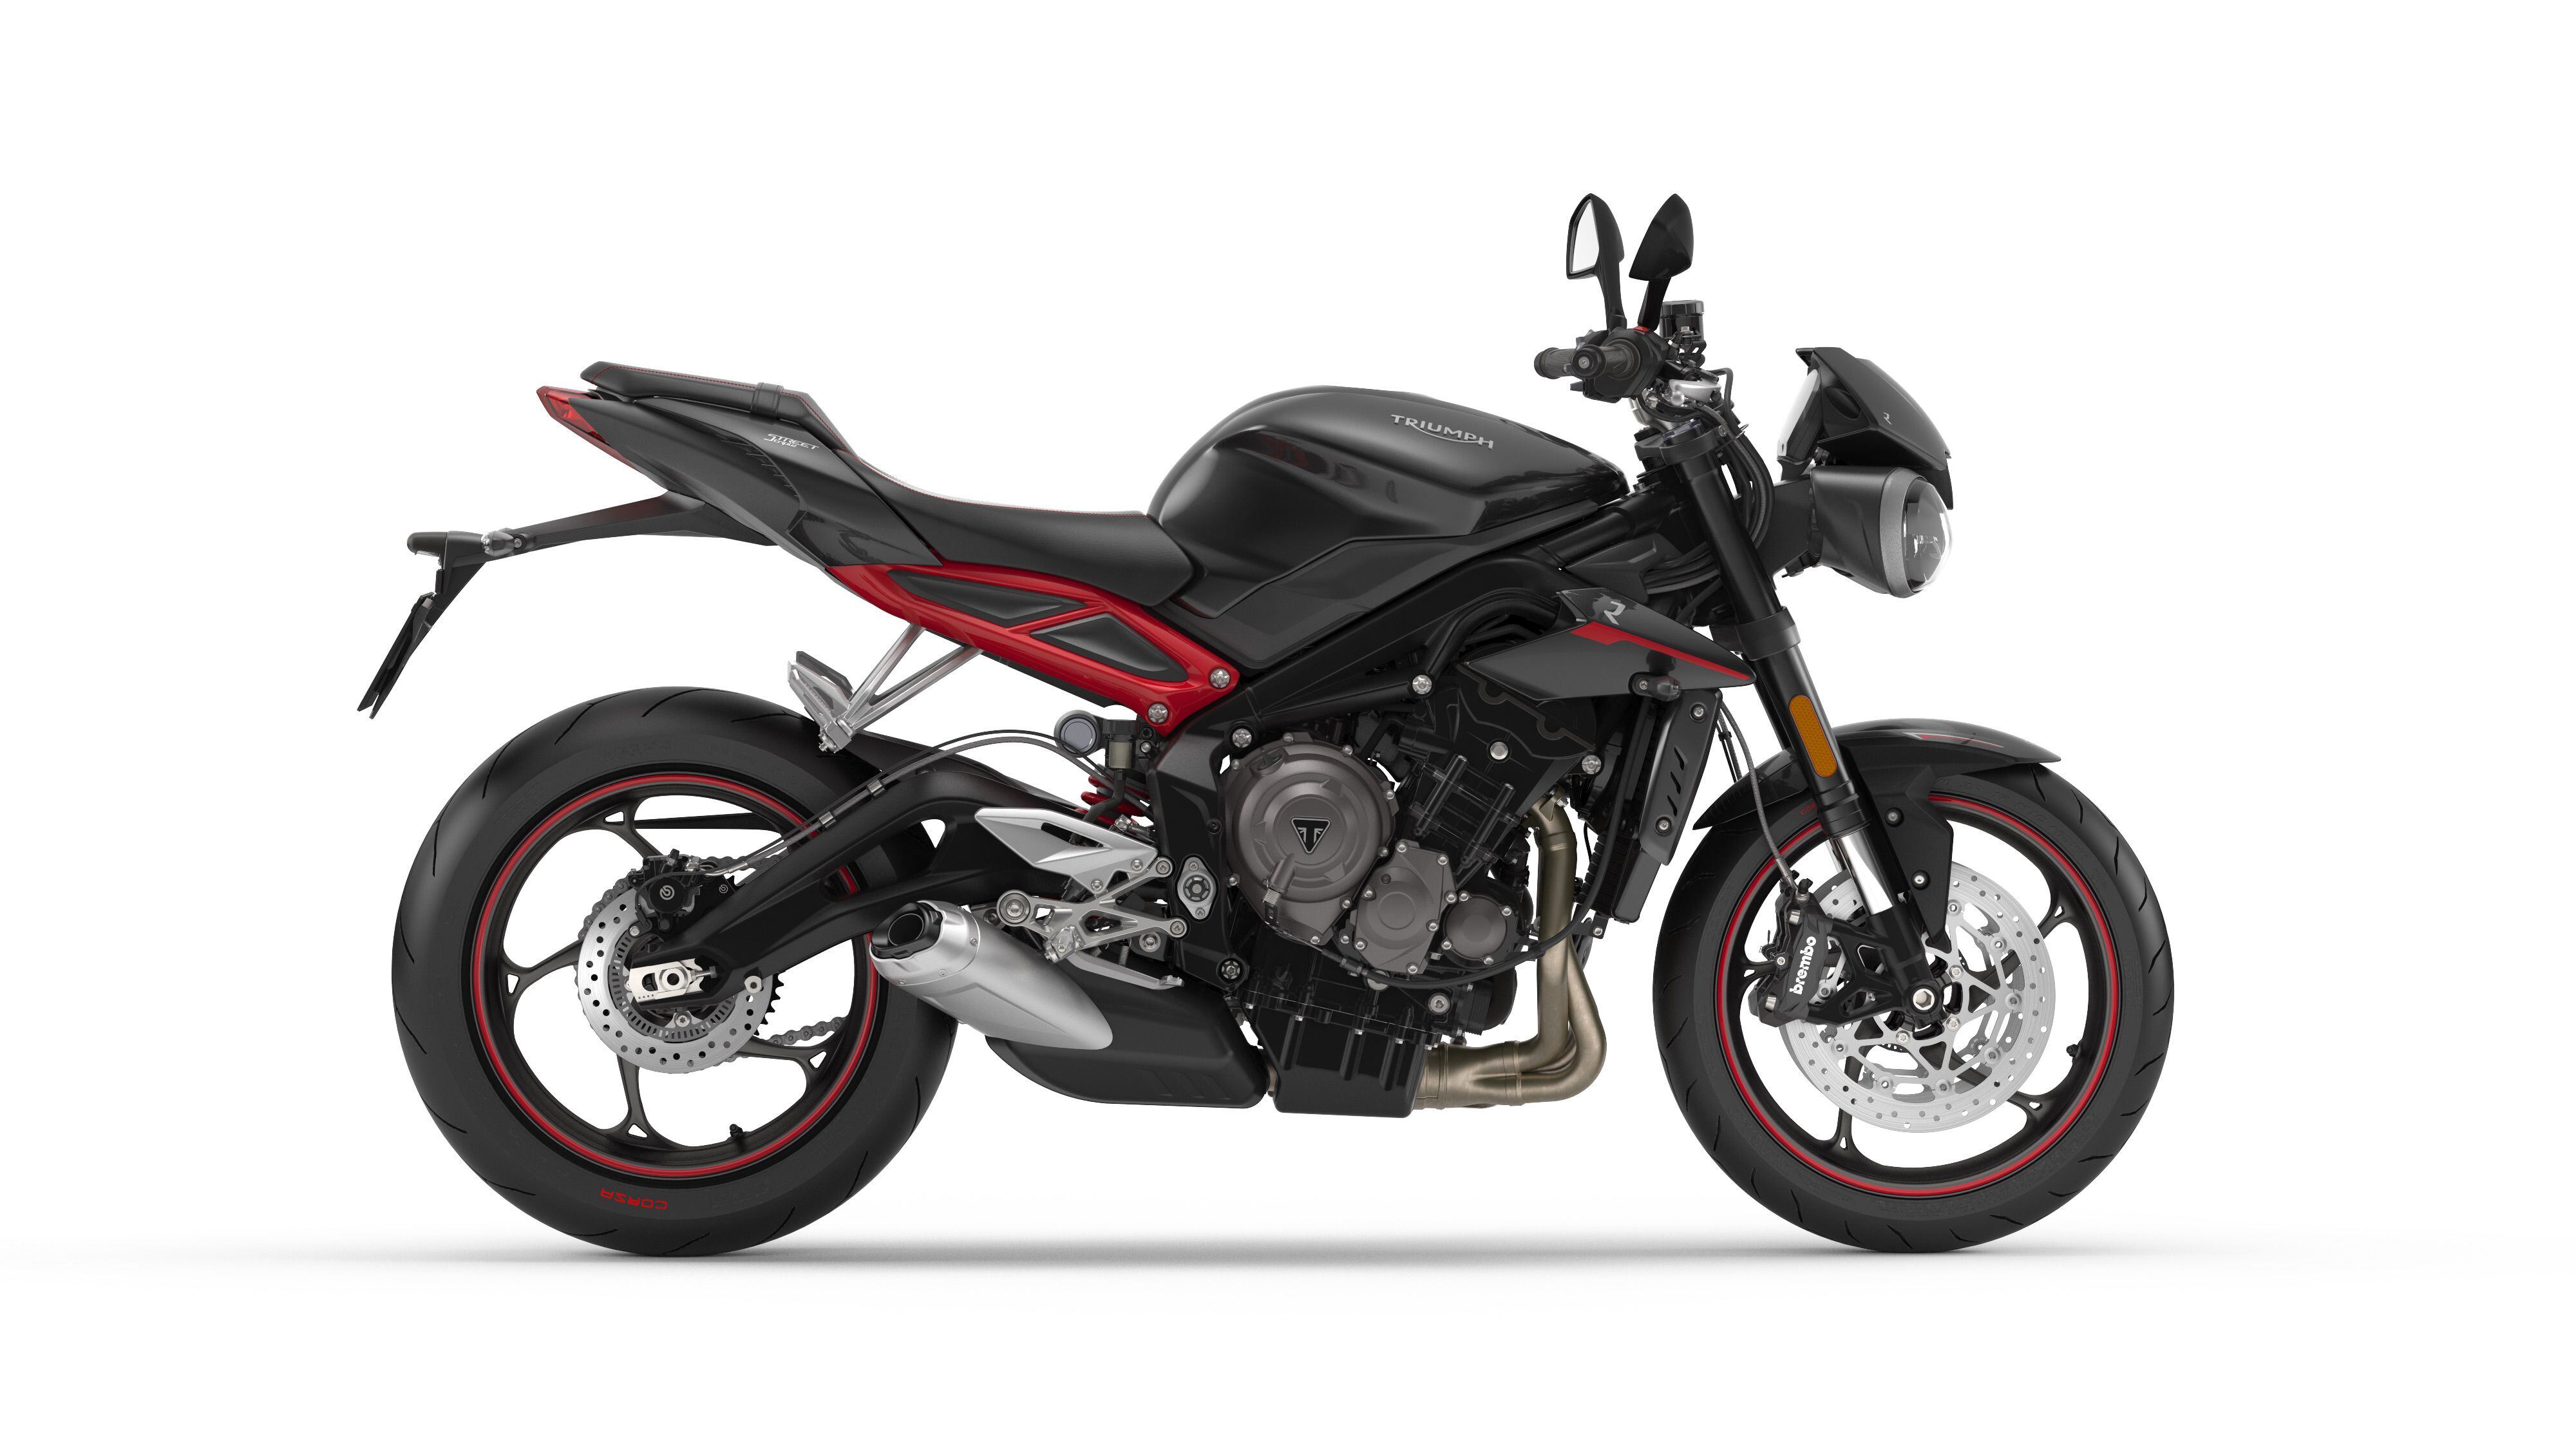 2019 Triumph Street Triple S/R/RS Buyer's Guide: Specs, Photos, Price |  Cycle World